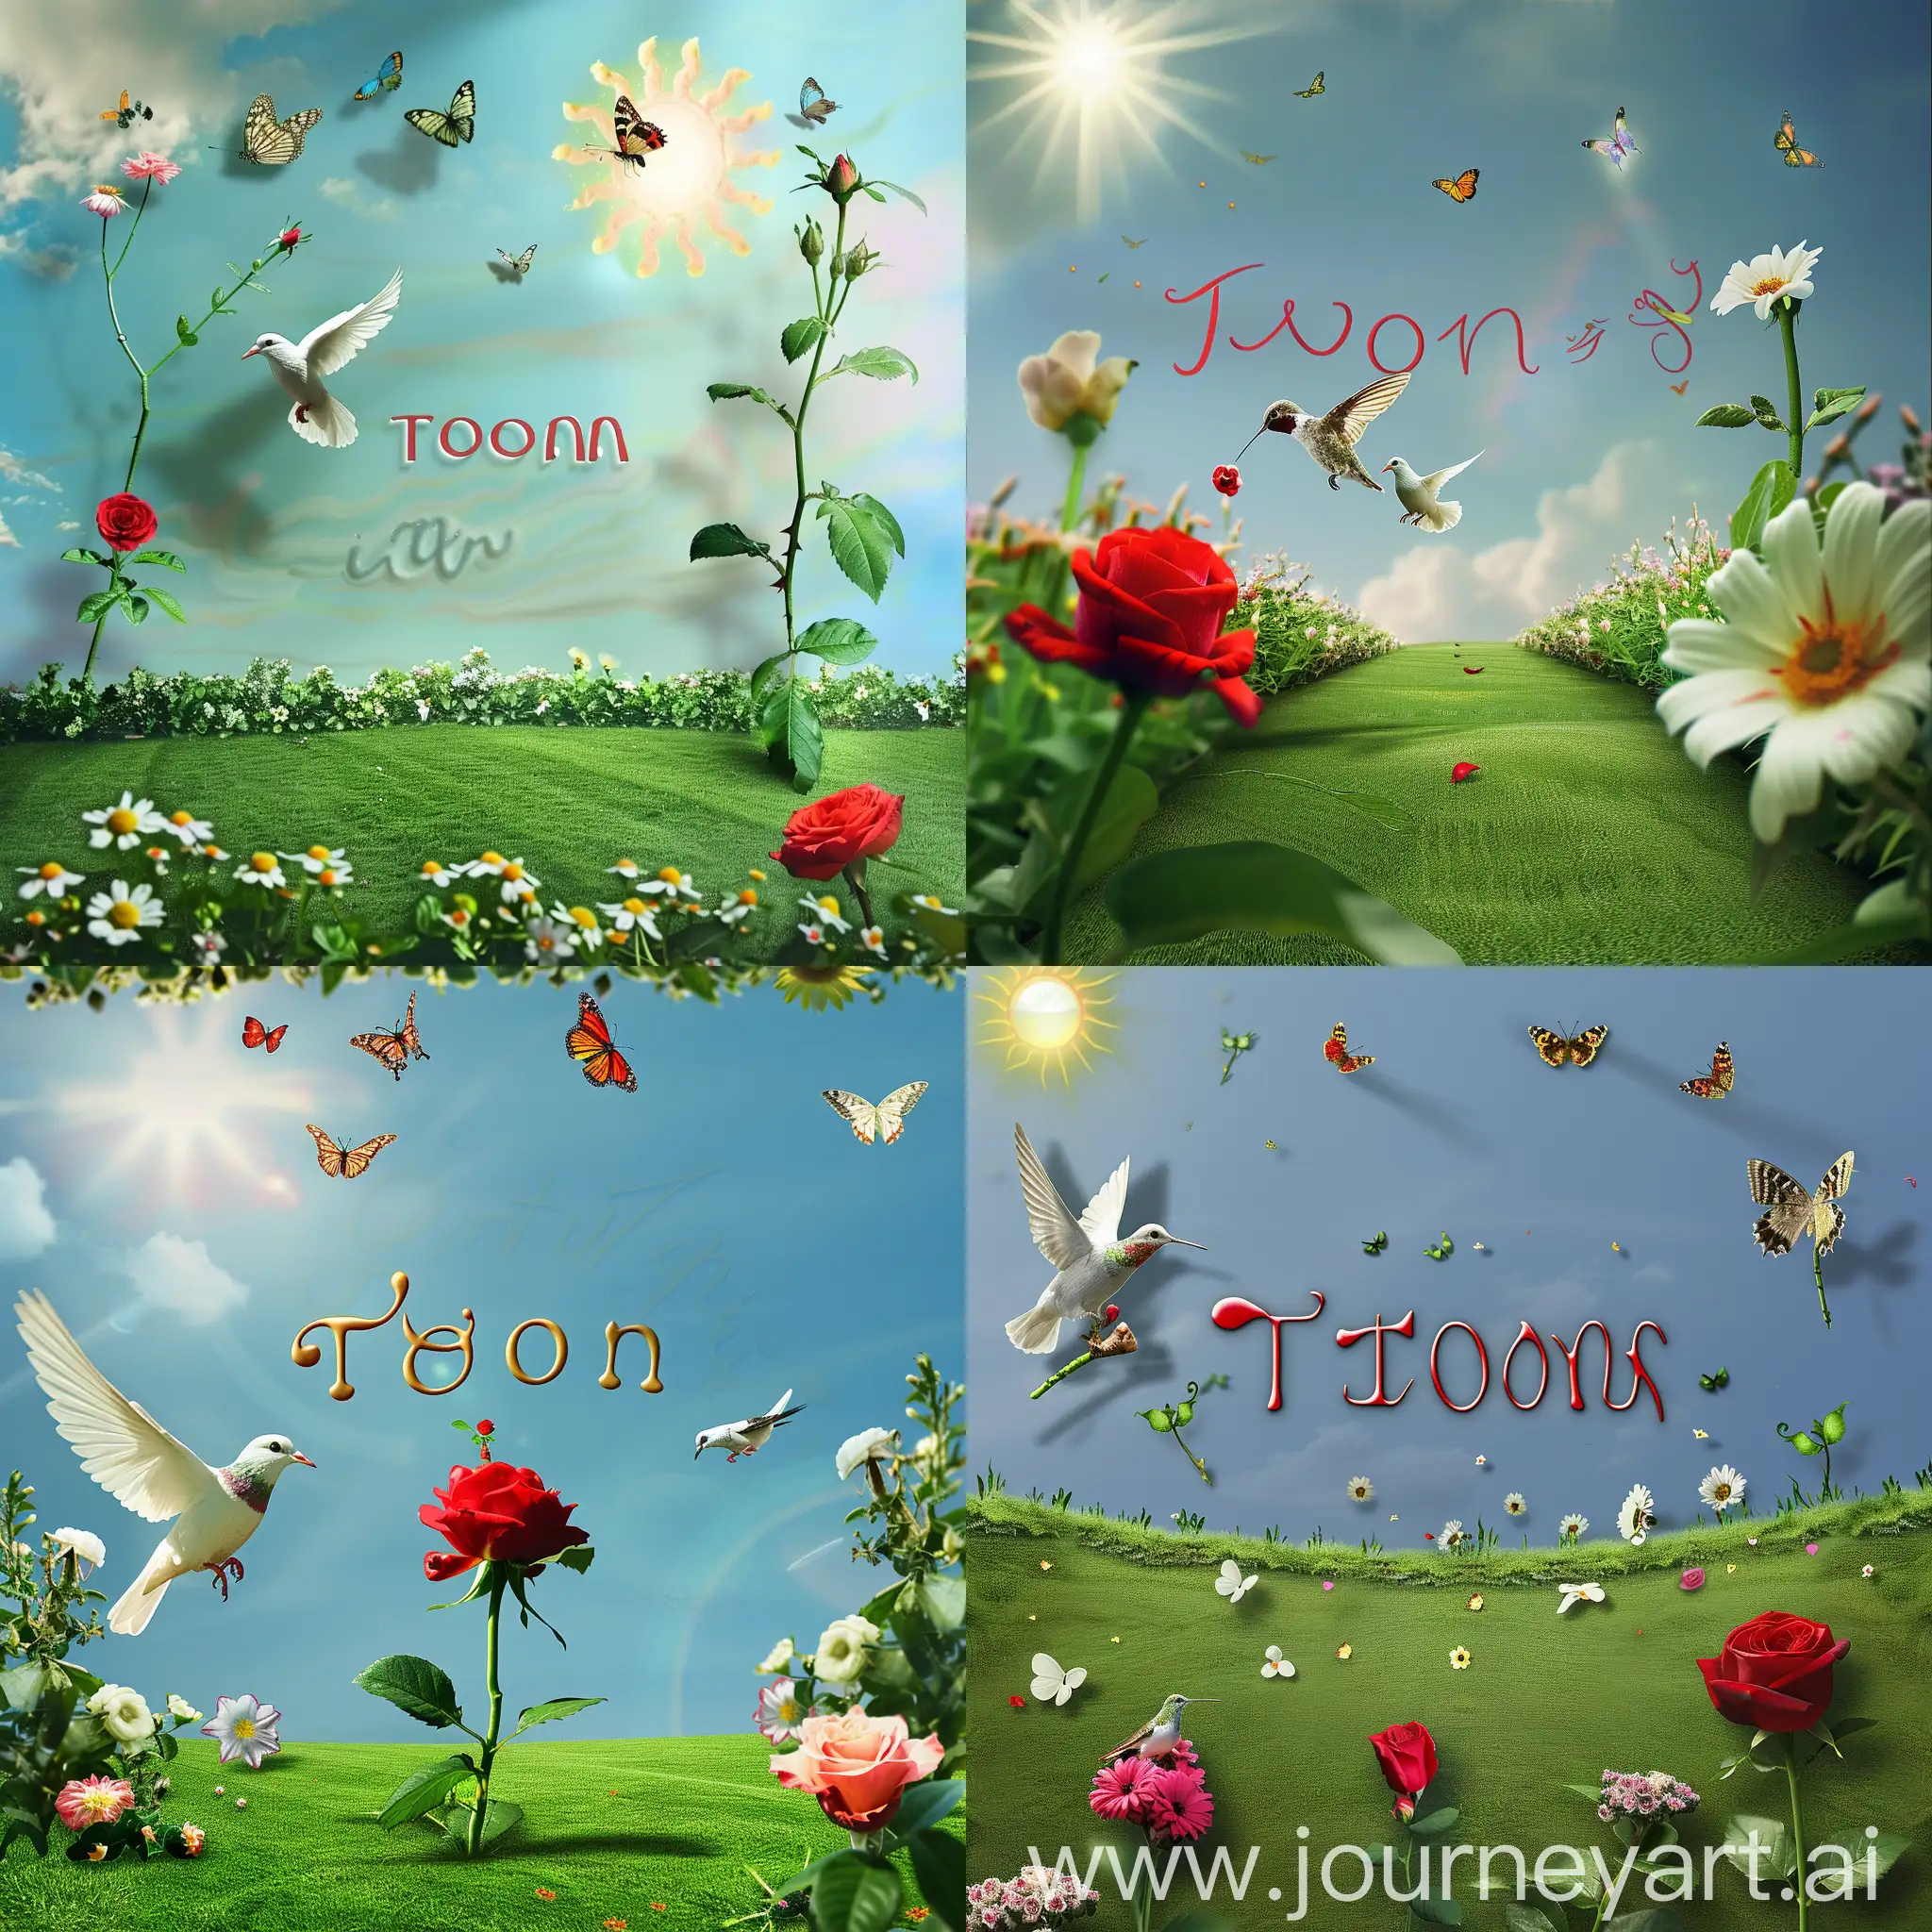 Create a surrealistic long shot image of a flower garden with smooth green lawn with three very small butterflies flitting at the top of the image and a very small hummingbird seen perched on a flower by the left side of the image. A  small white dove flies across the image with a small red rose flower and stem in its beak. In the background written in medium size letters is the name "Tonia". The sun can be seen in a blue sky. 